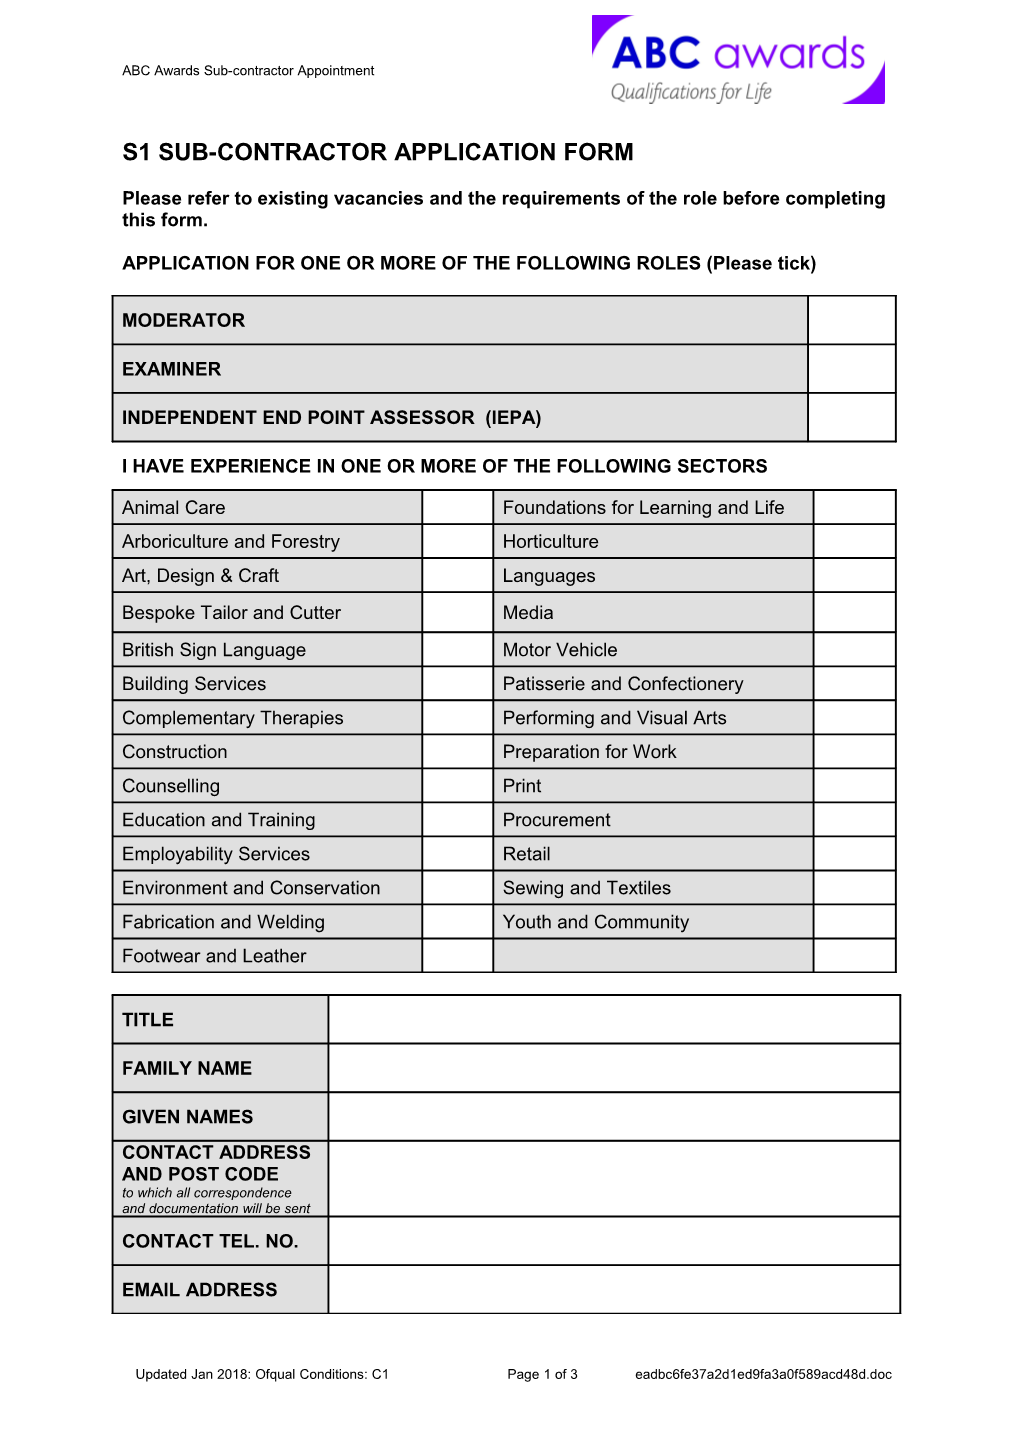 S1 Sub-Contractor Application Form